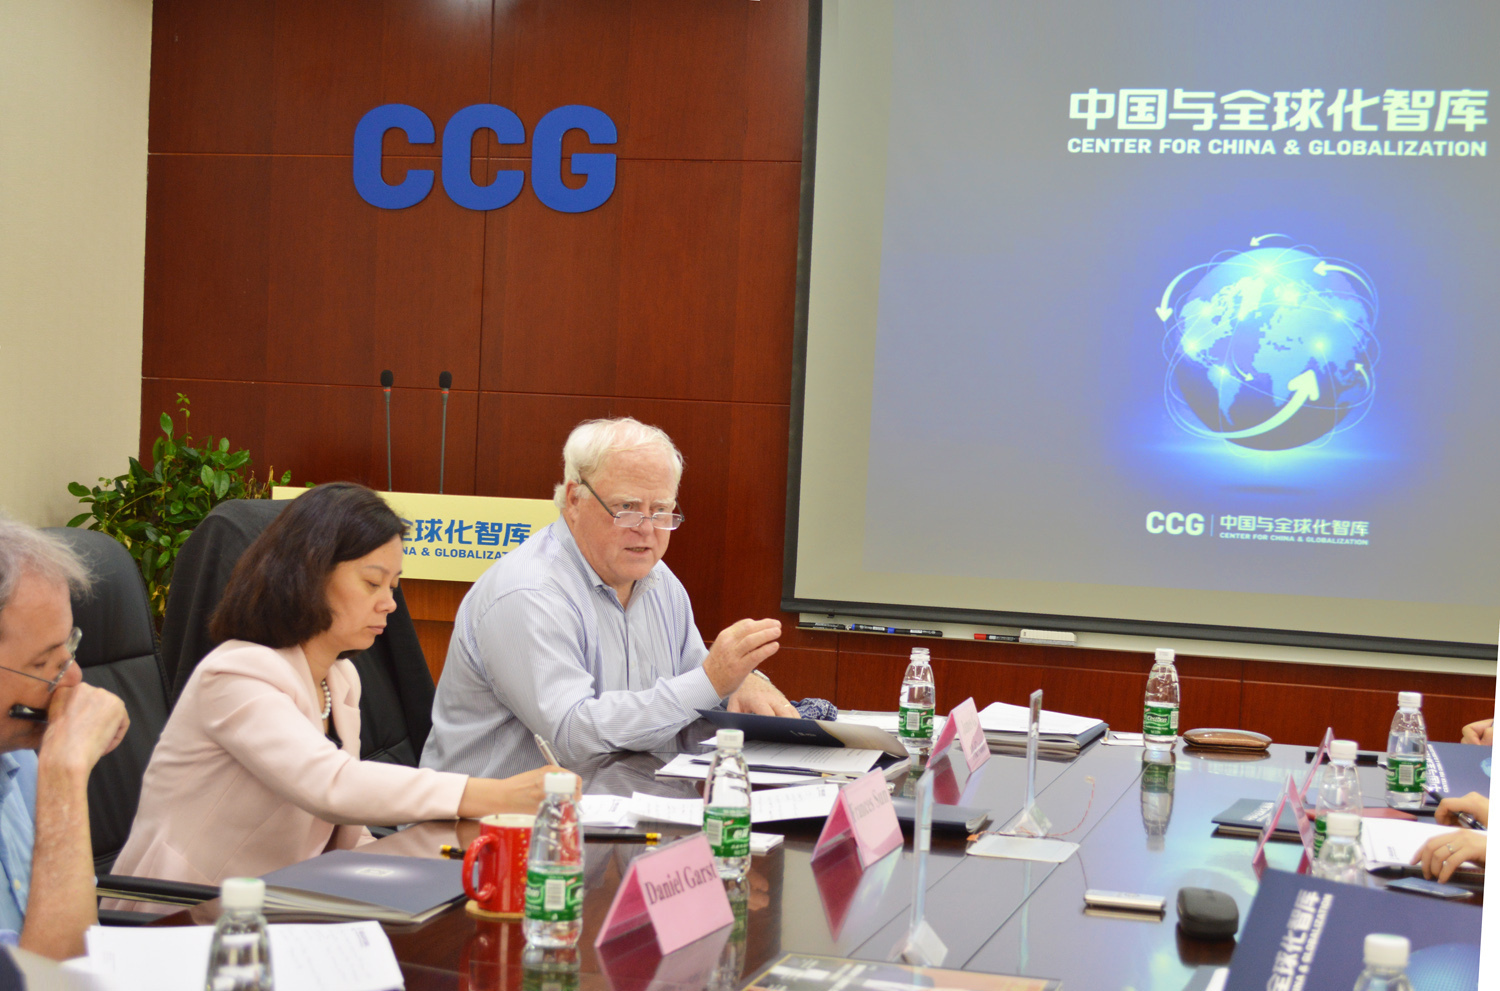 James G. McGann, a professor at the University of Pennsylvania and an expert on think tanks, spoke at a roundtable meeting in Beijing on June 24, 2015 on how to build more globalized think tanks in China. [China.org.cn]